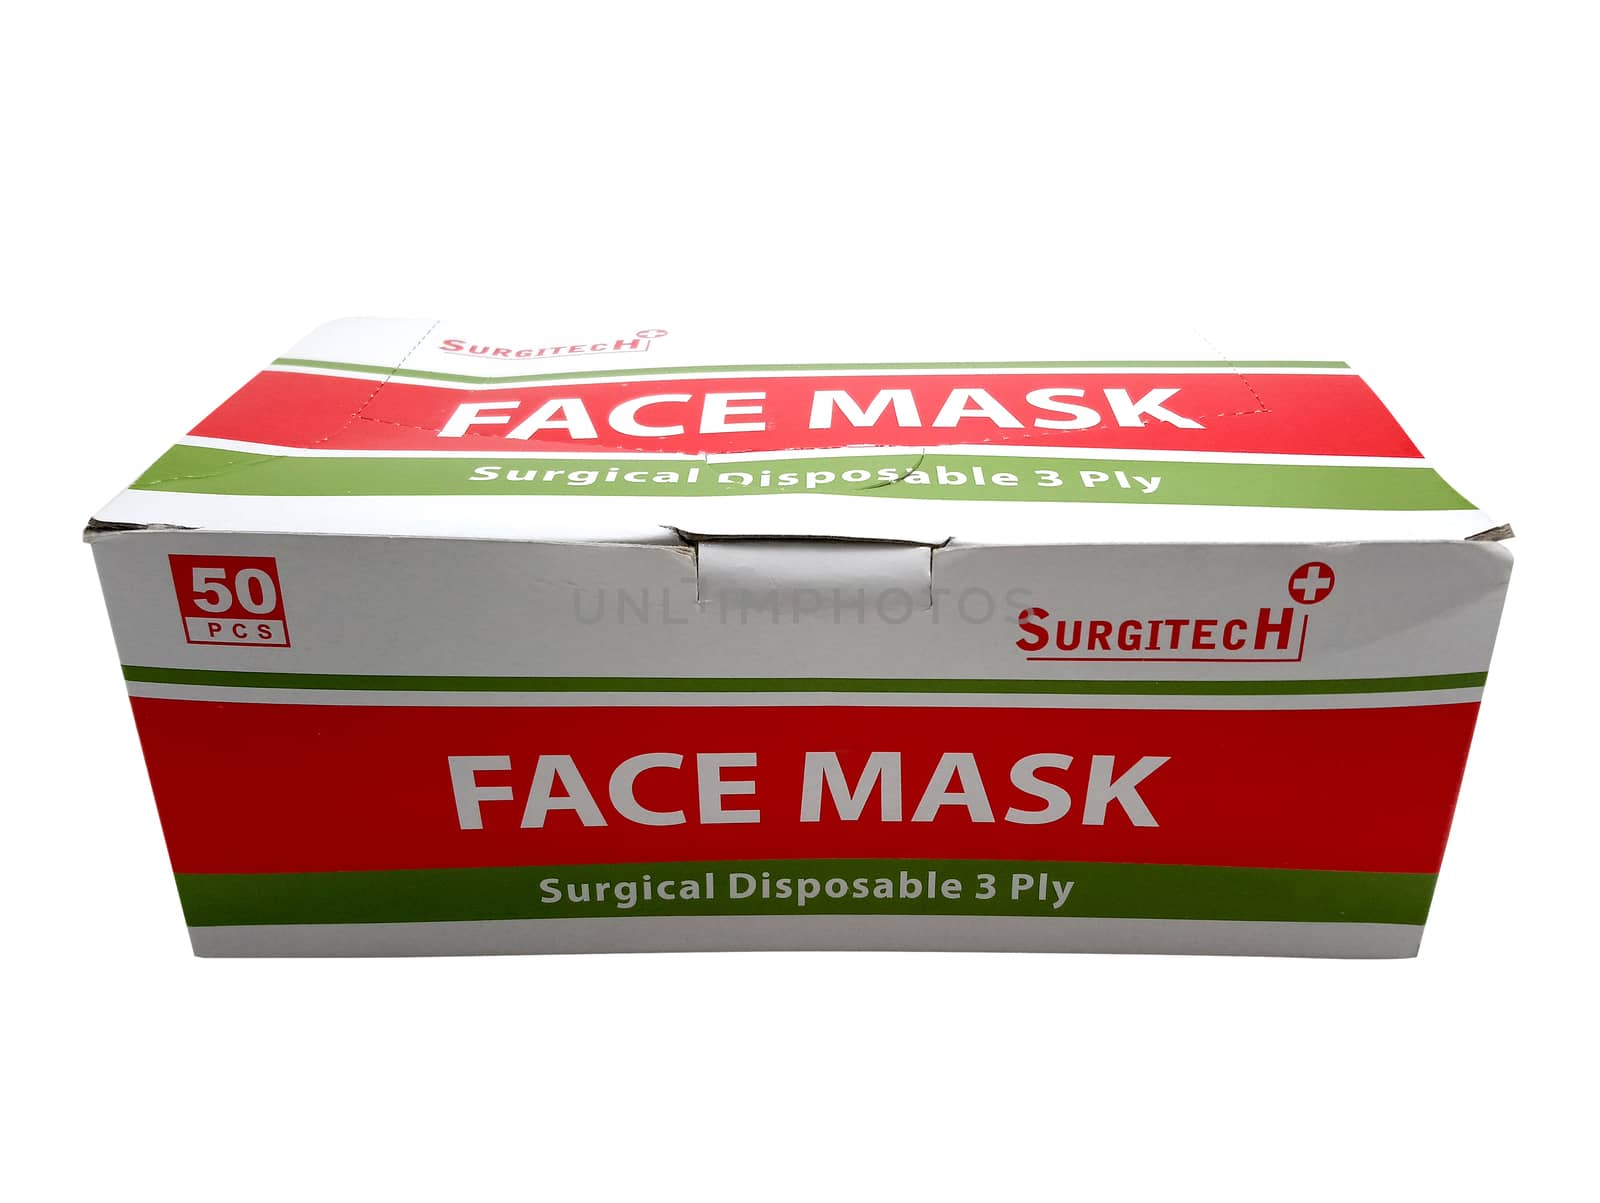 Surgitech face mask disposable 3 ply box by imwaltersy